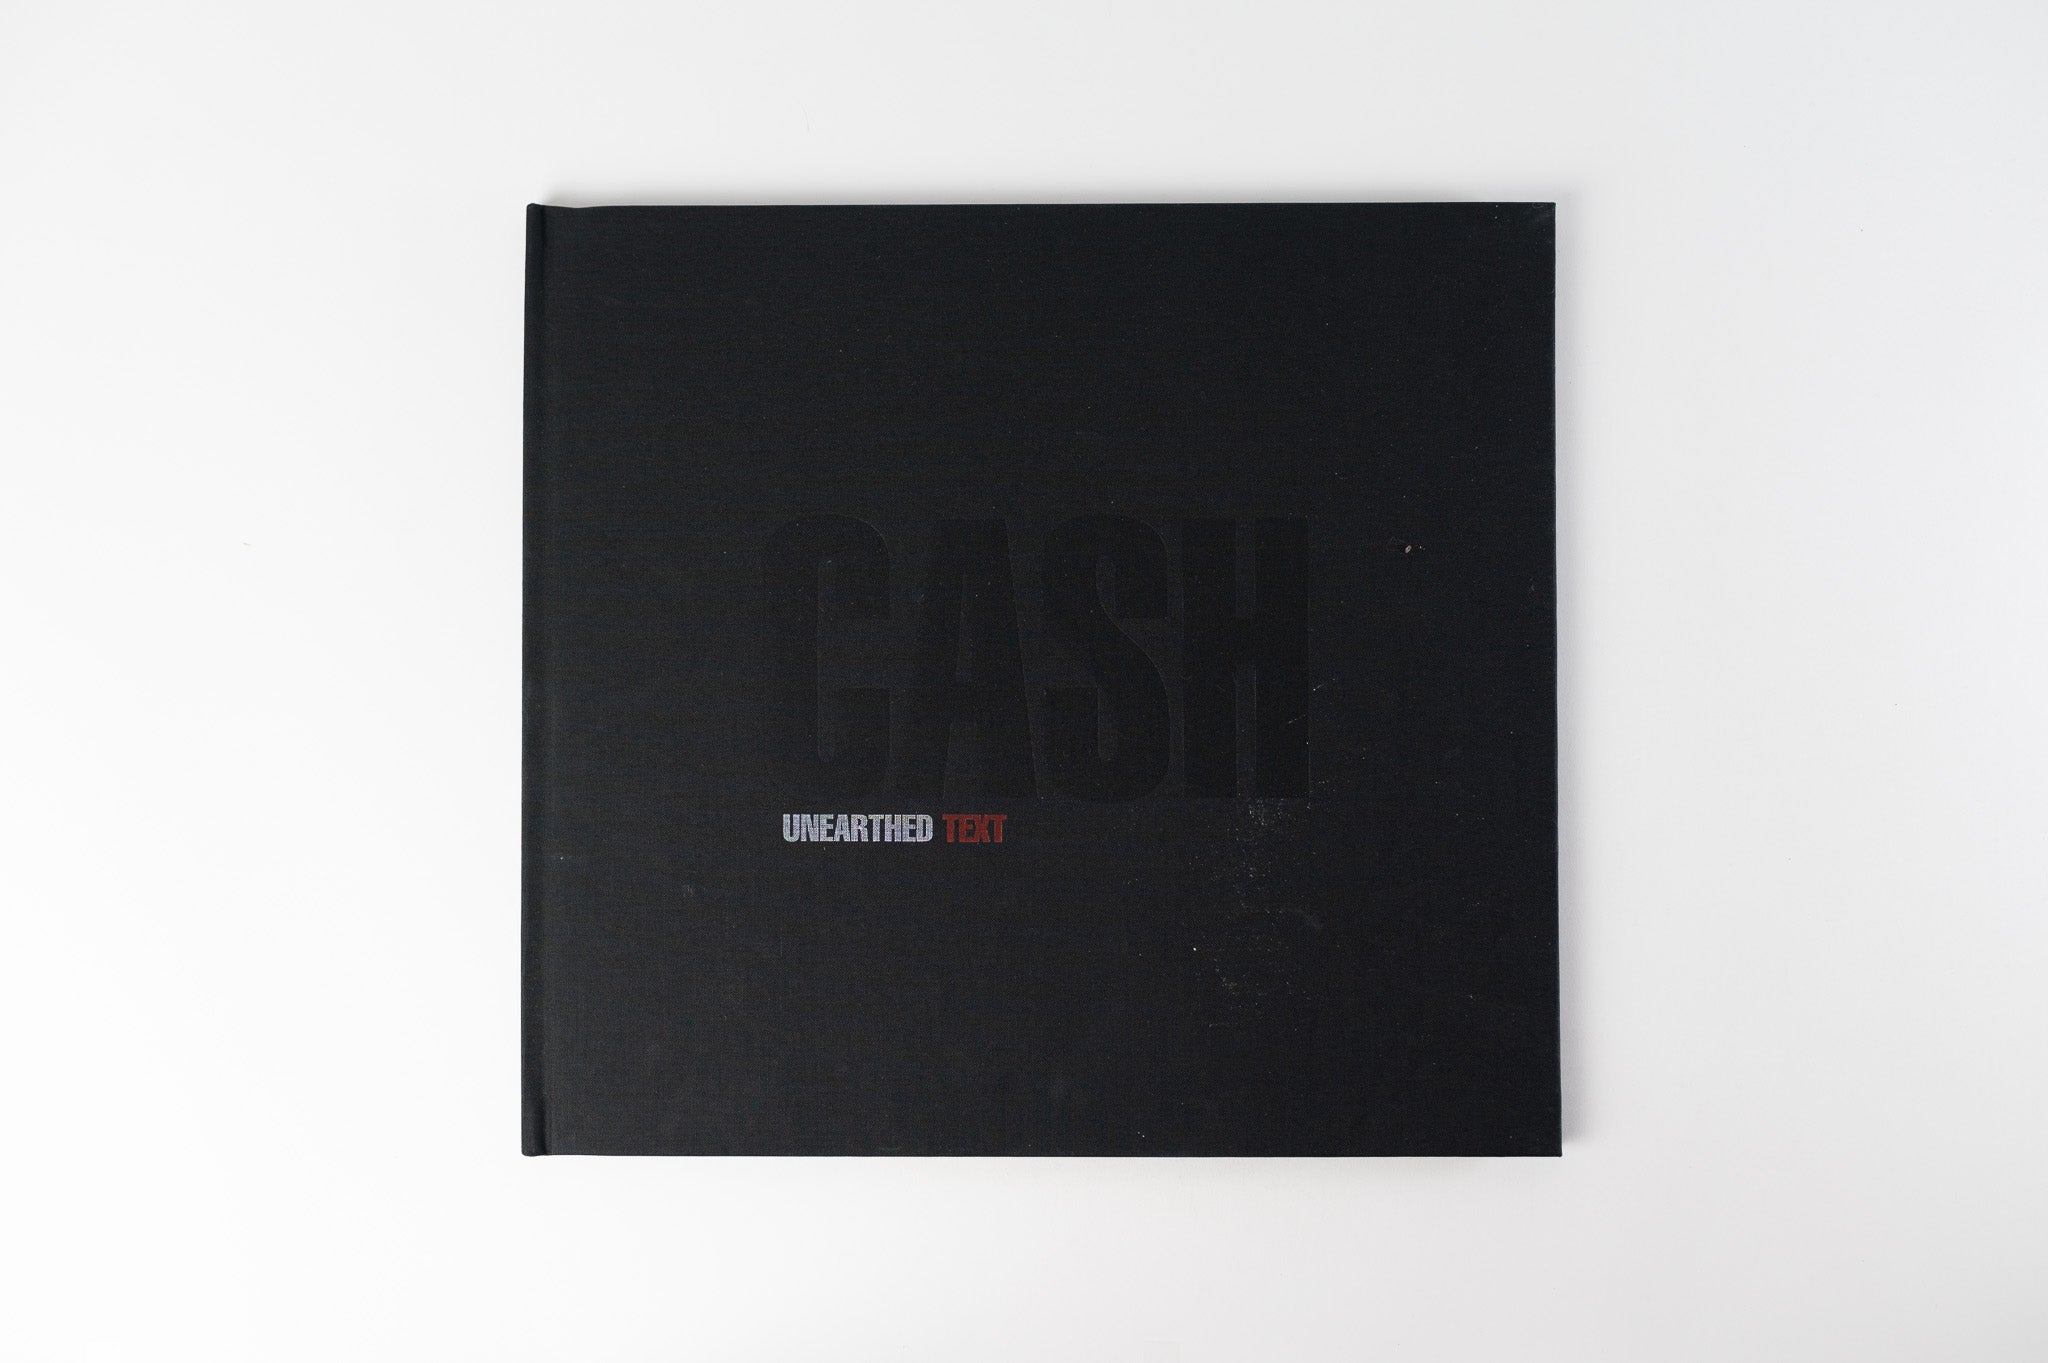 Johnny Cash - Unearthed on American Recordings Ltd Reissue Box Set